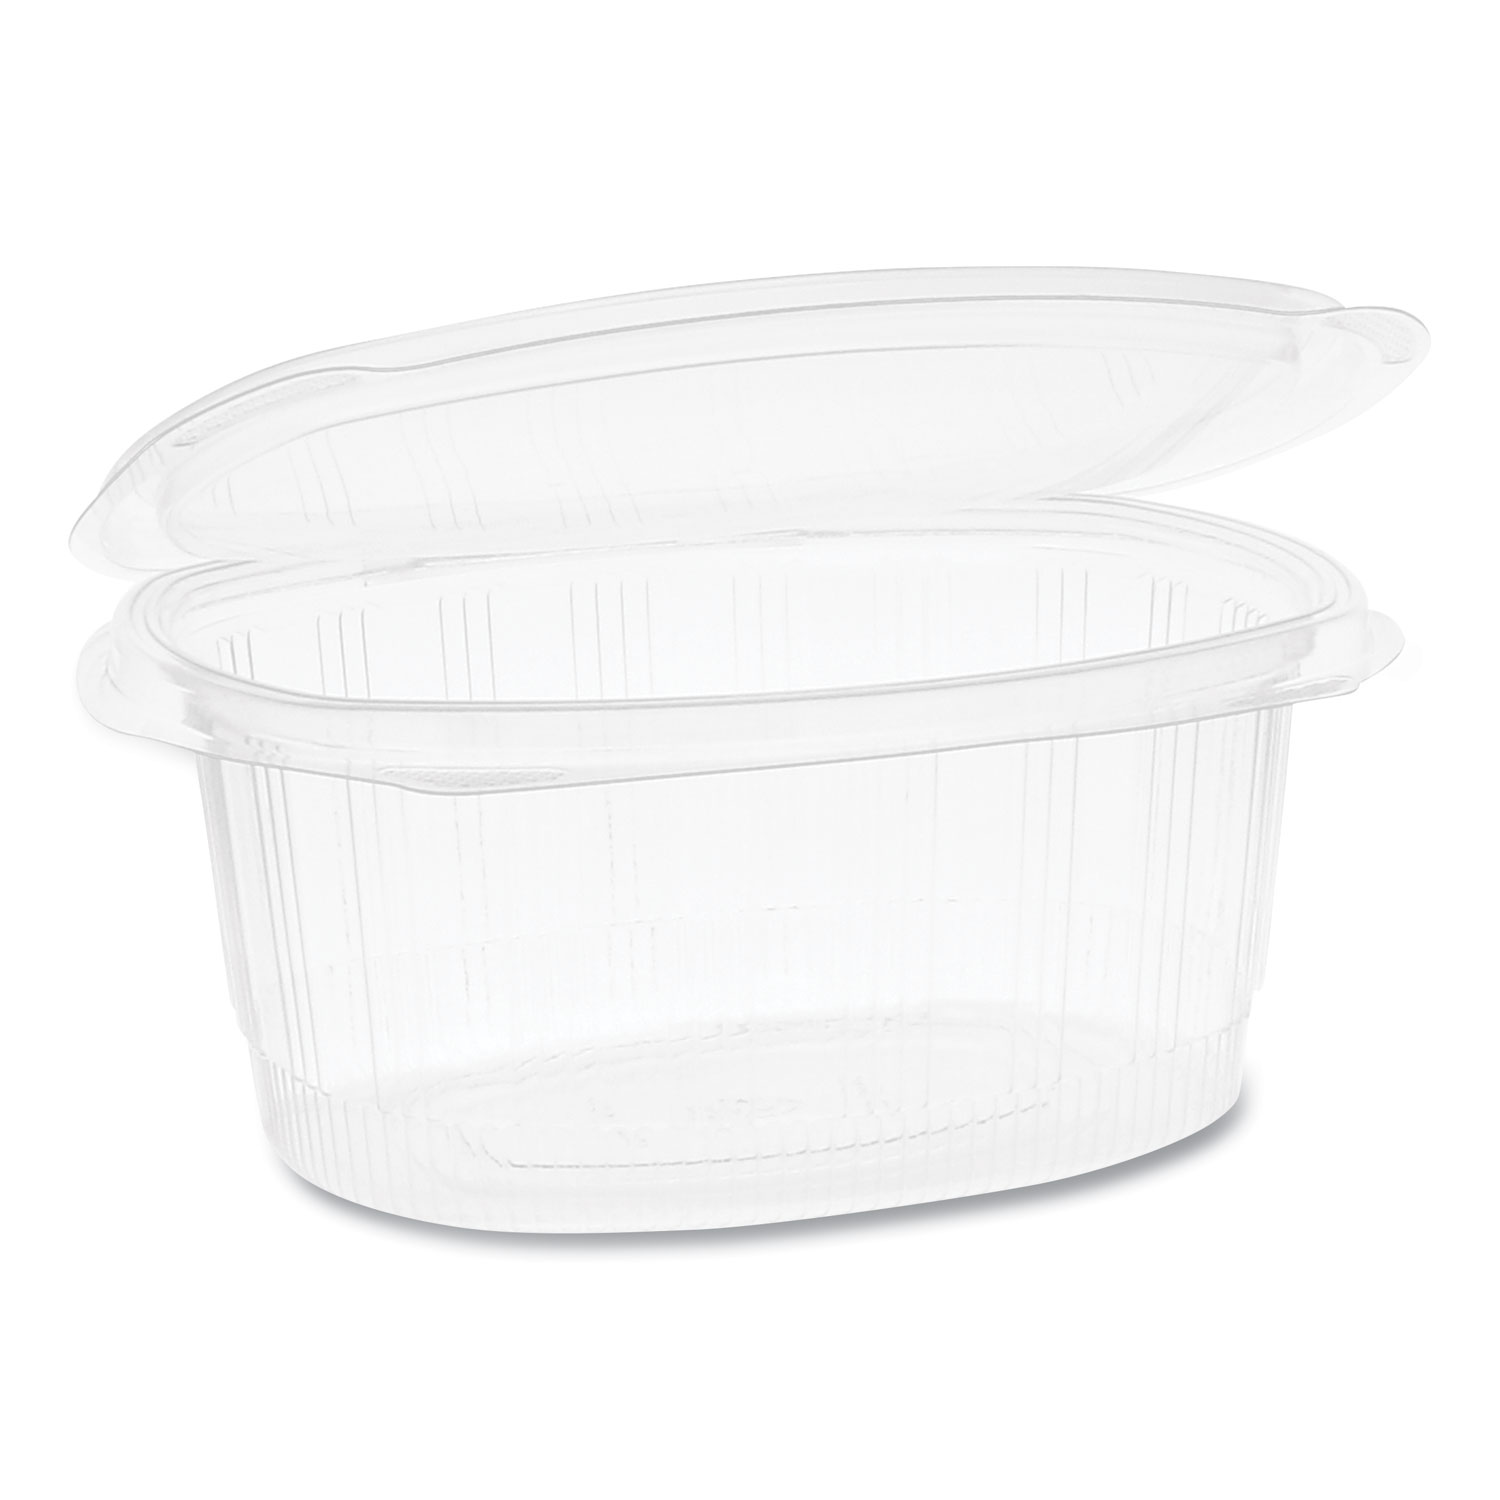 Pactiv EarthChoice PET Hinged Lid Deli Container, 7.31 x 5.88 x 3.25, 32 oz, 1-Compartment, Clear, 280/Carton